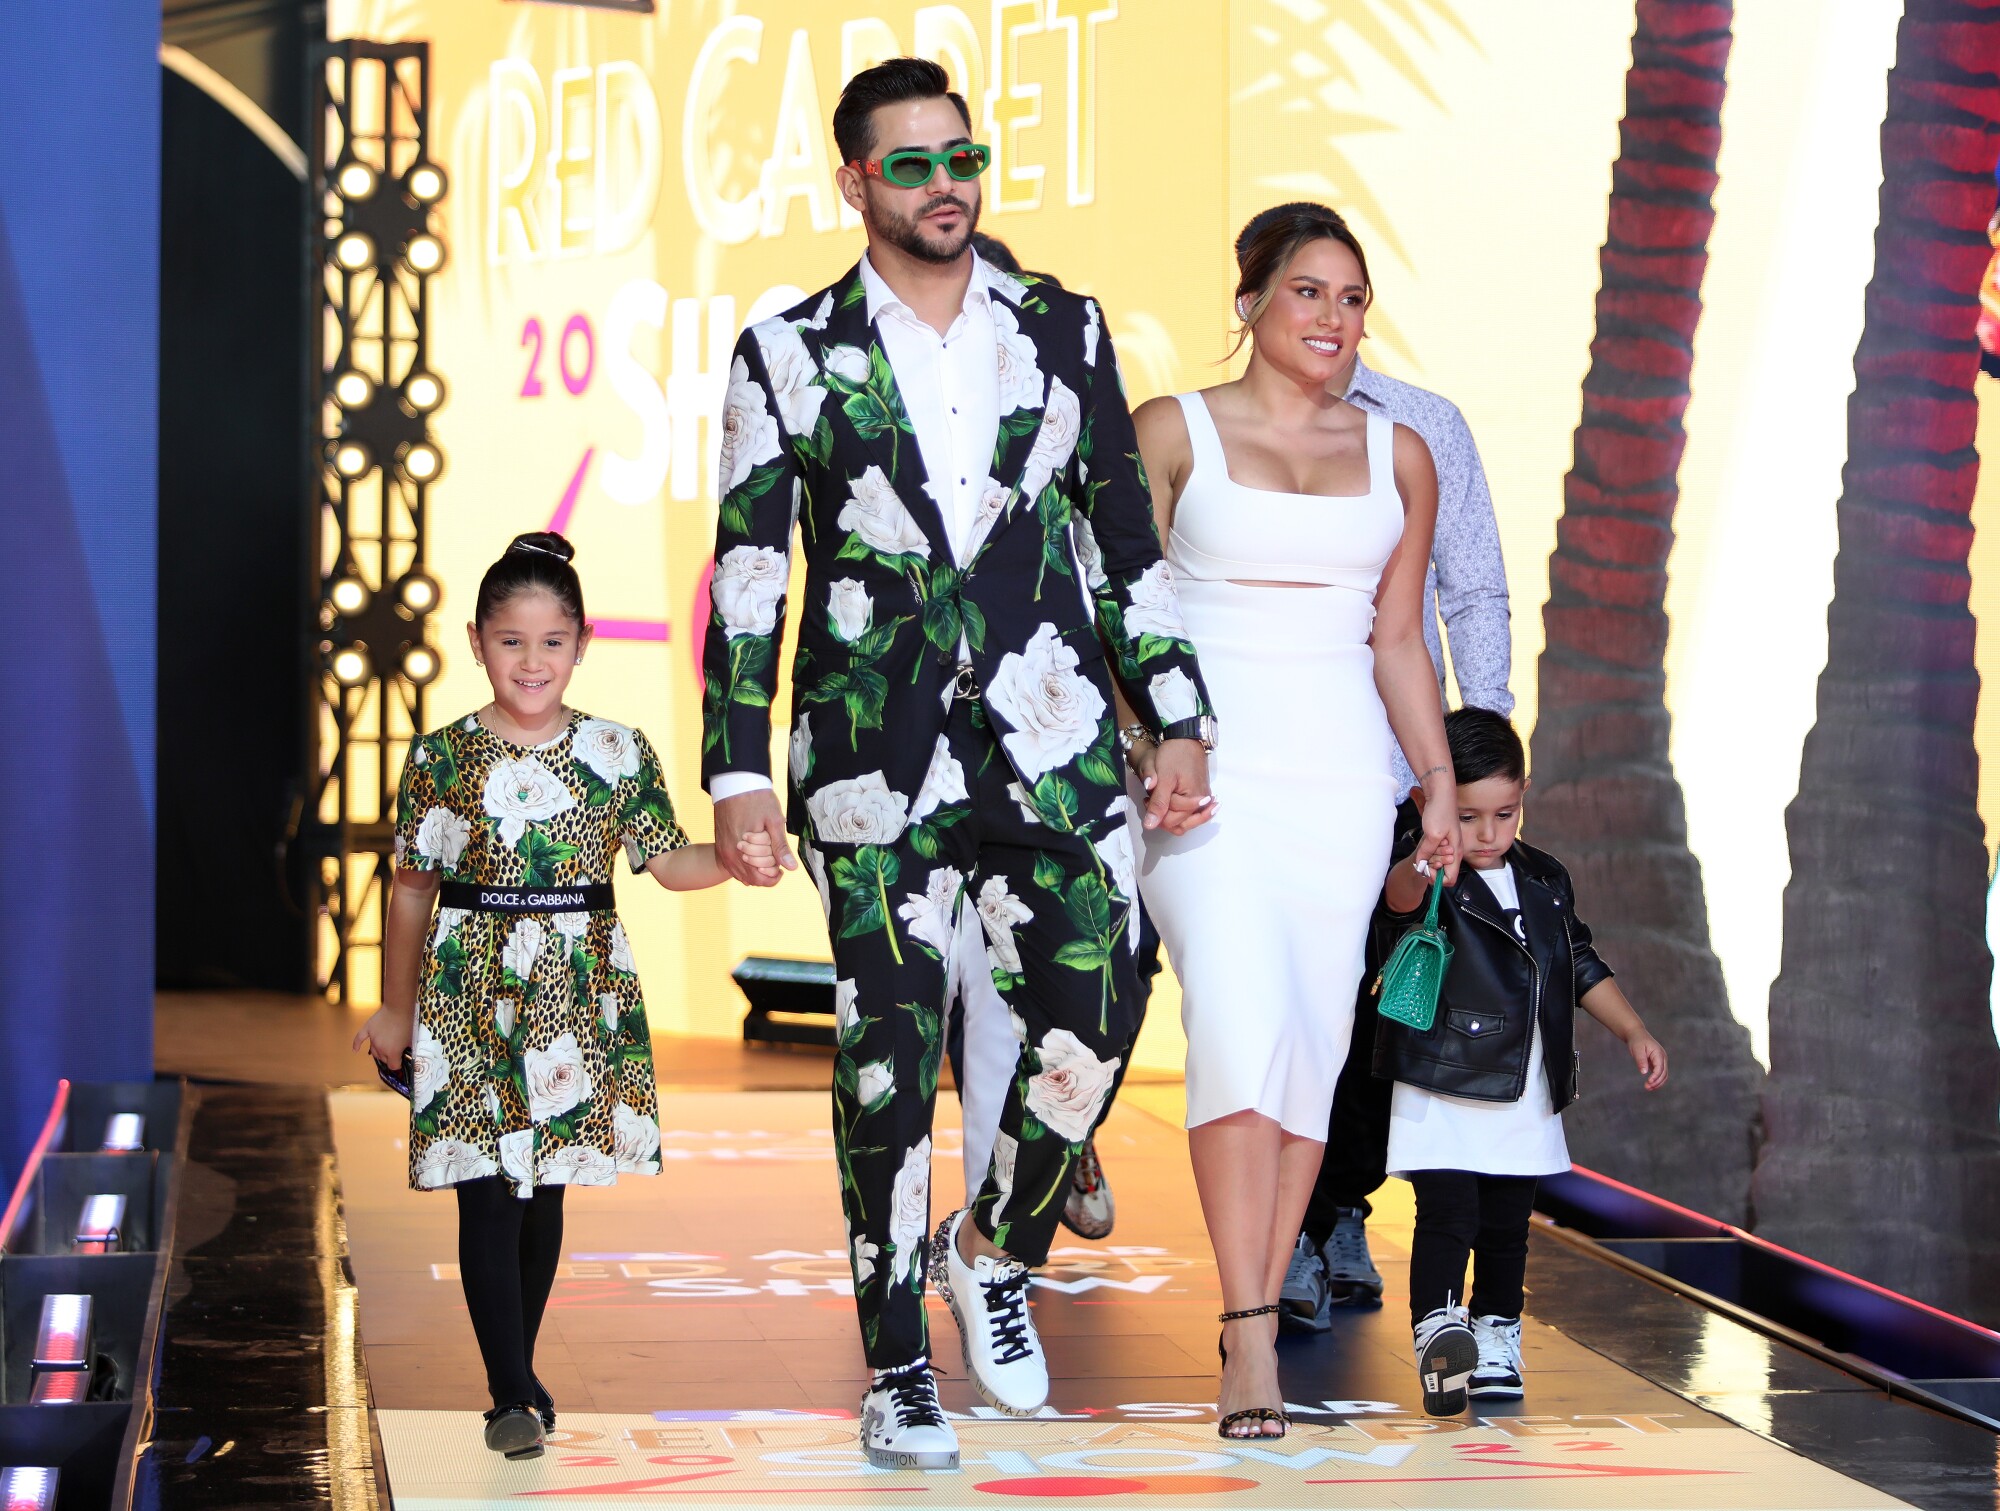 Texas Rangers pitcher Martin Perez and his family arrive on the red carpet for the 2022 MLB All-Star Game.